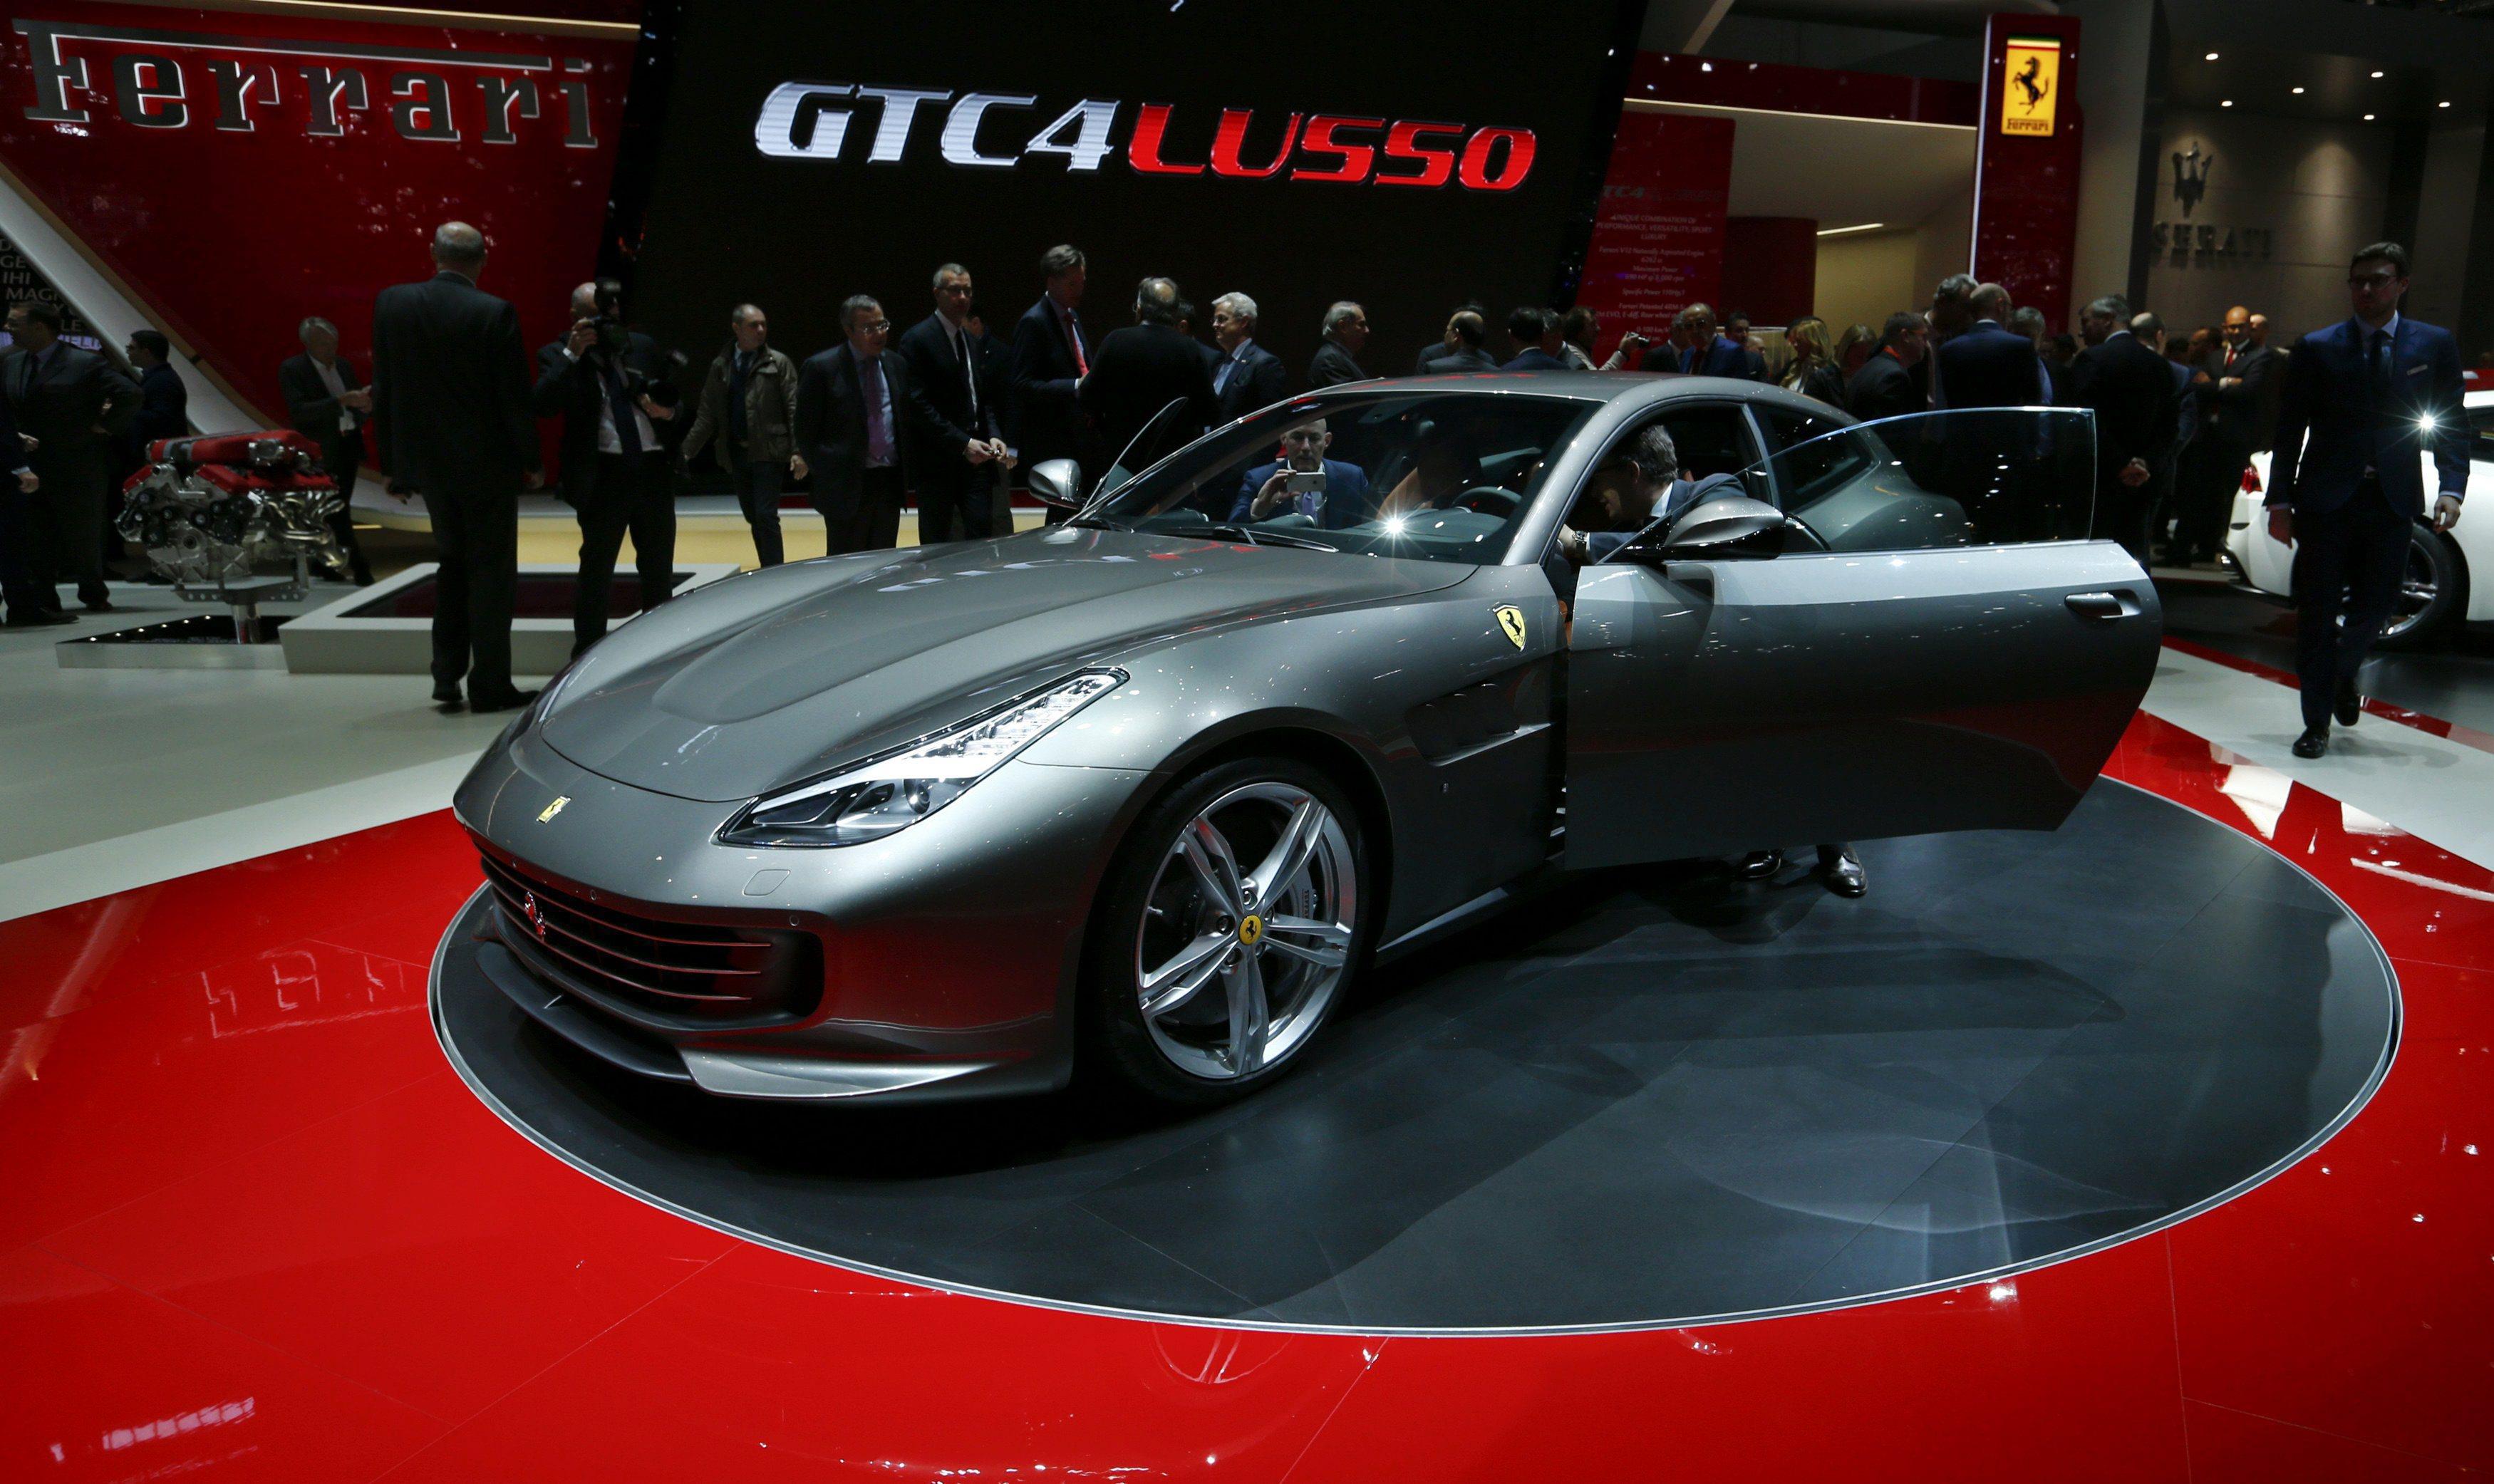 A Ferrari GTC4Lusso car is pictured at the 86th International Motor Show in Geneva